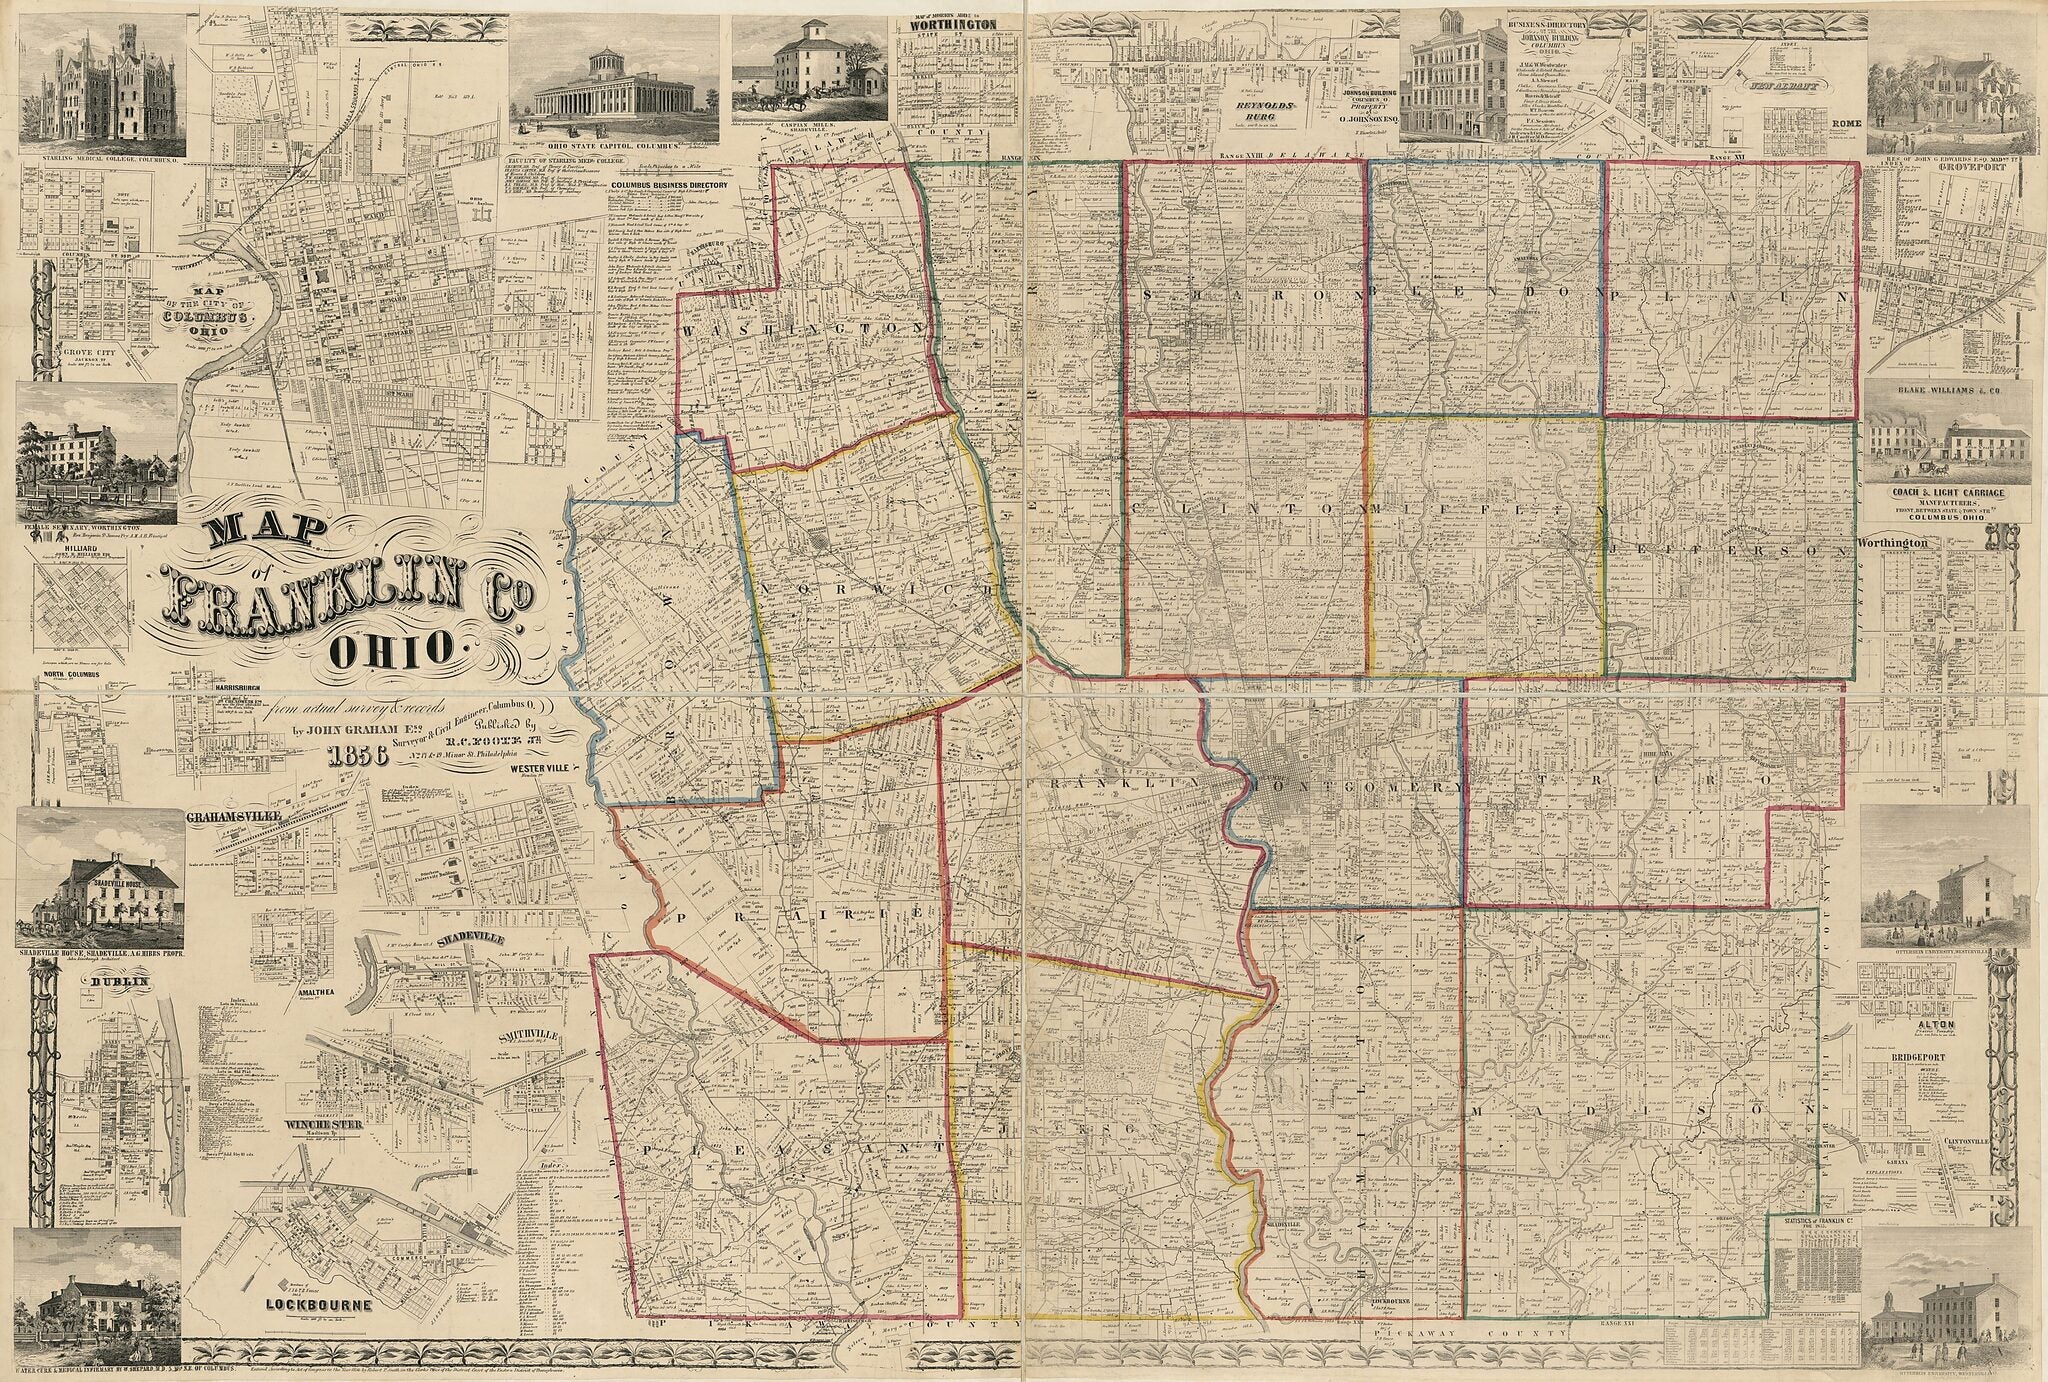 This old map of Map of Franklin County, Ohio from 1856 was created by John Graham in 1856